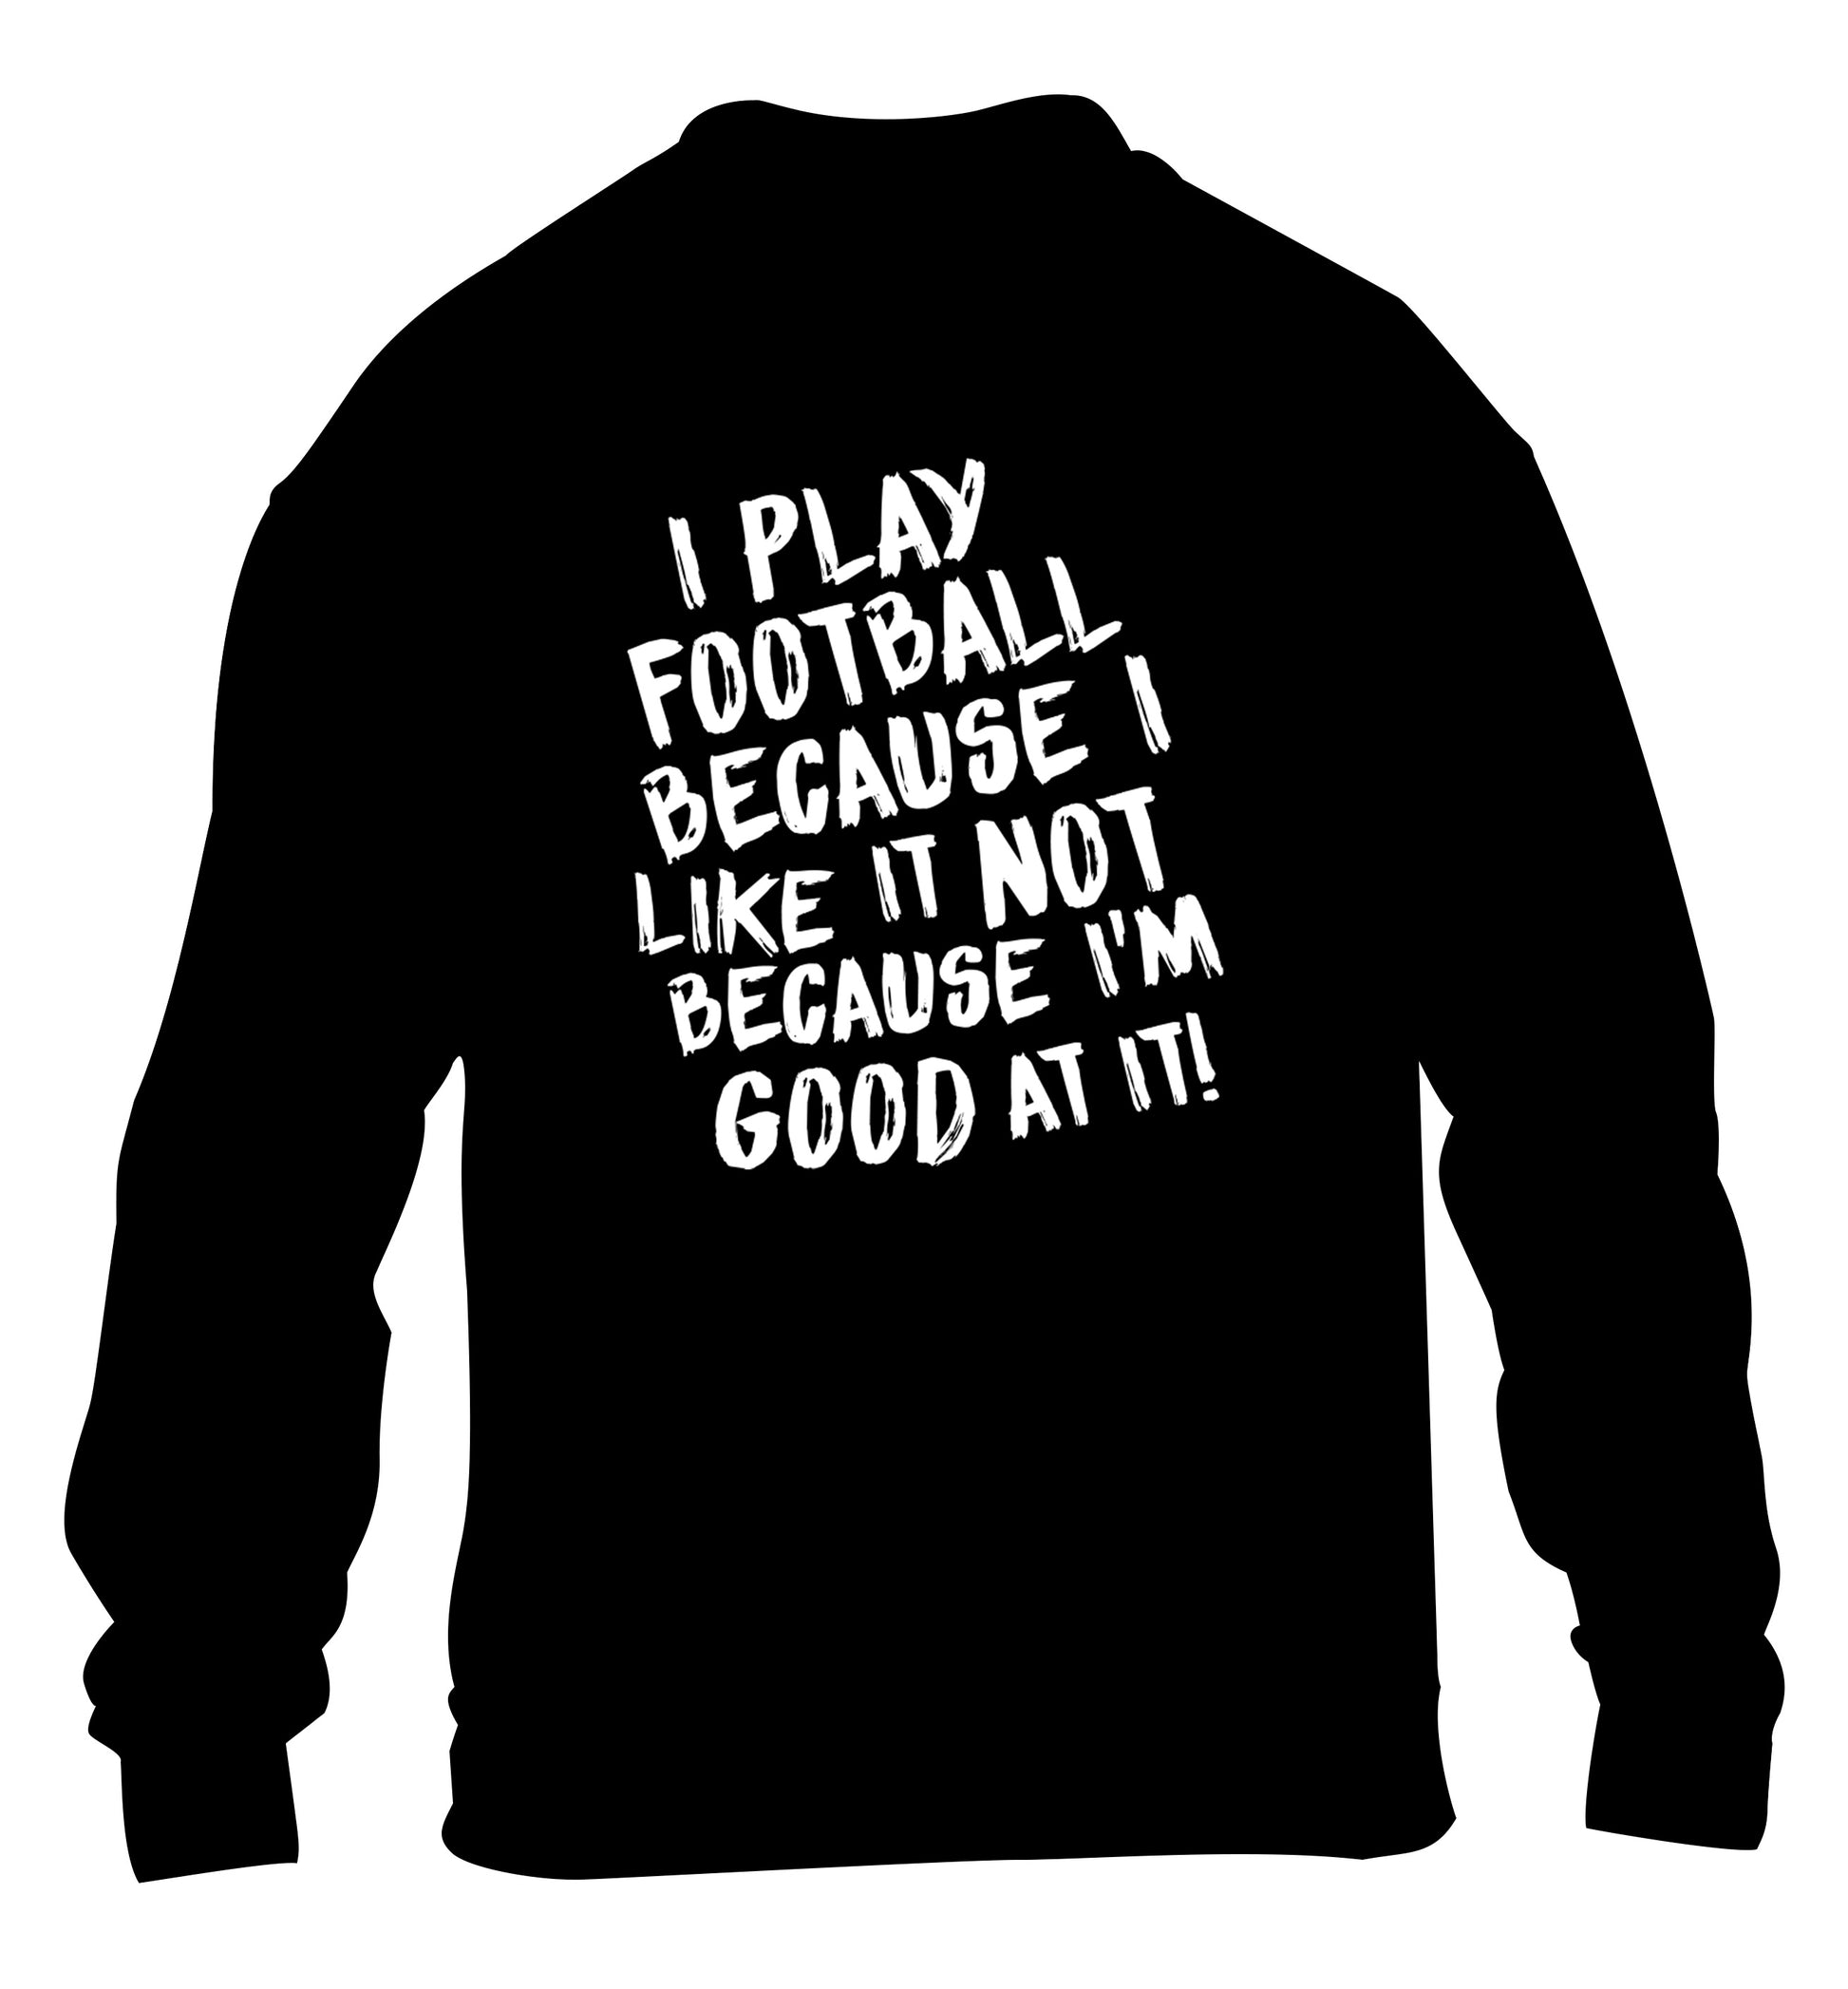 I play football because I like it not because I'm good at it children's black sweater 12-14 Years